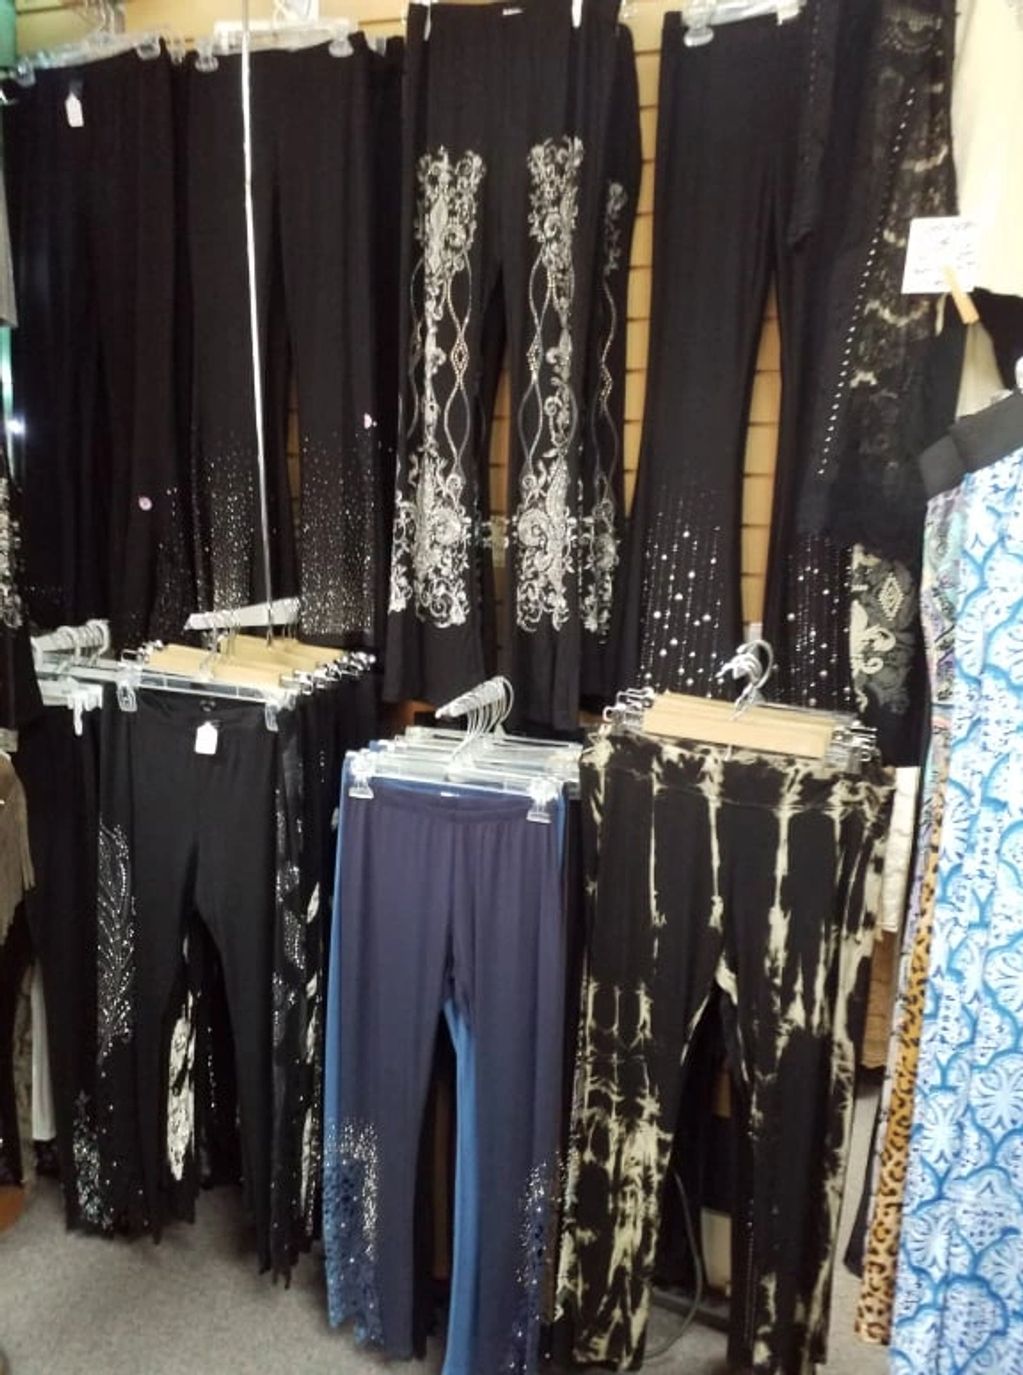 Wide Variety of Classy Glitz leggings.  Sizes Small to XL.  We also have some in 1xl to 2xl.